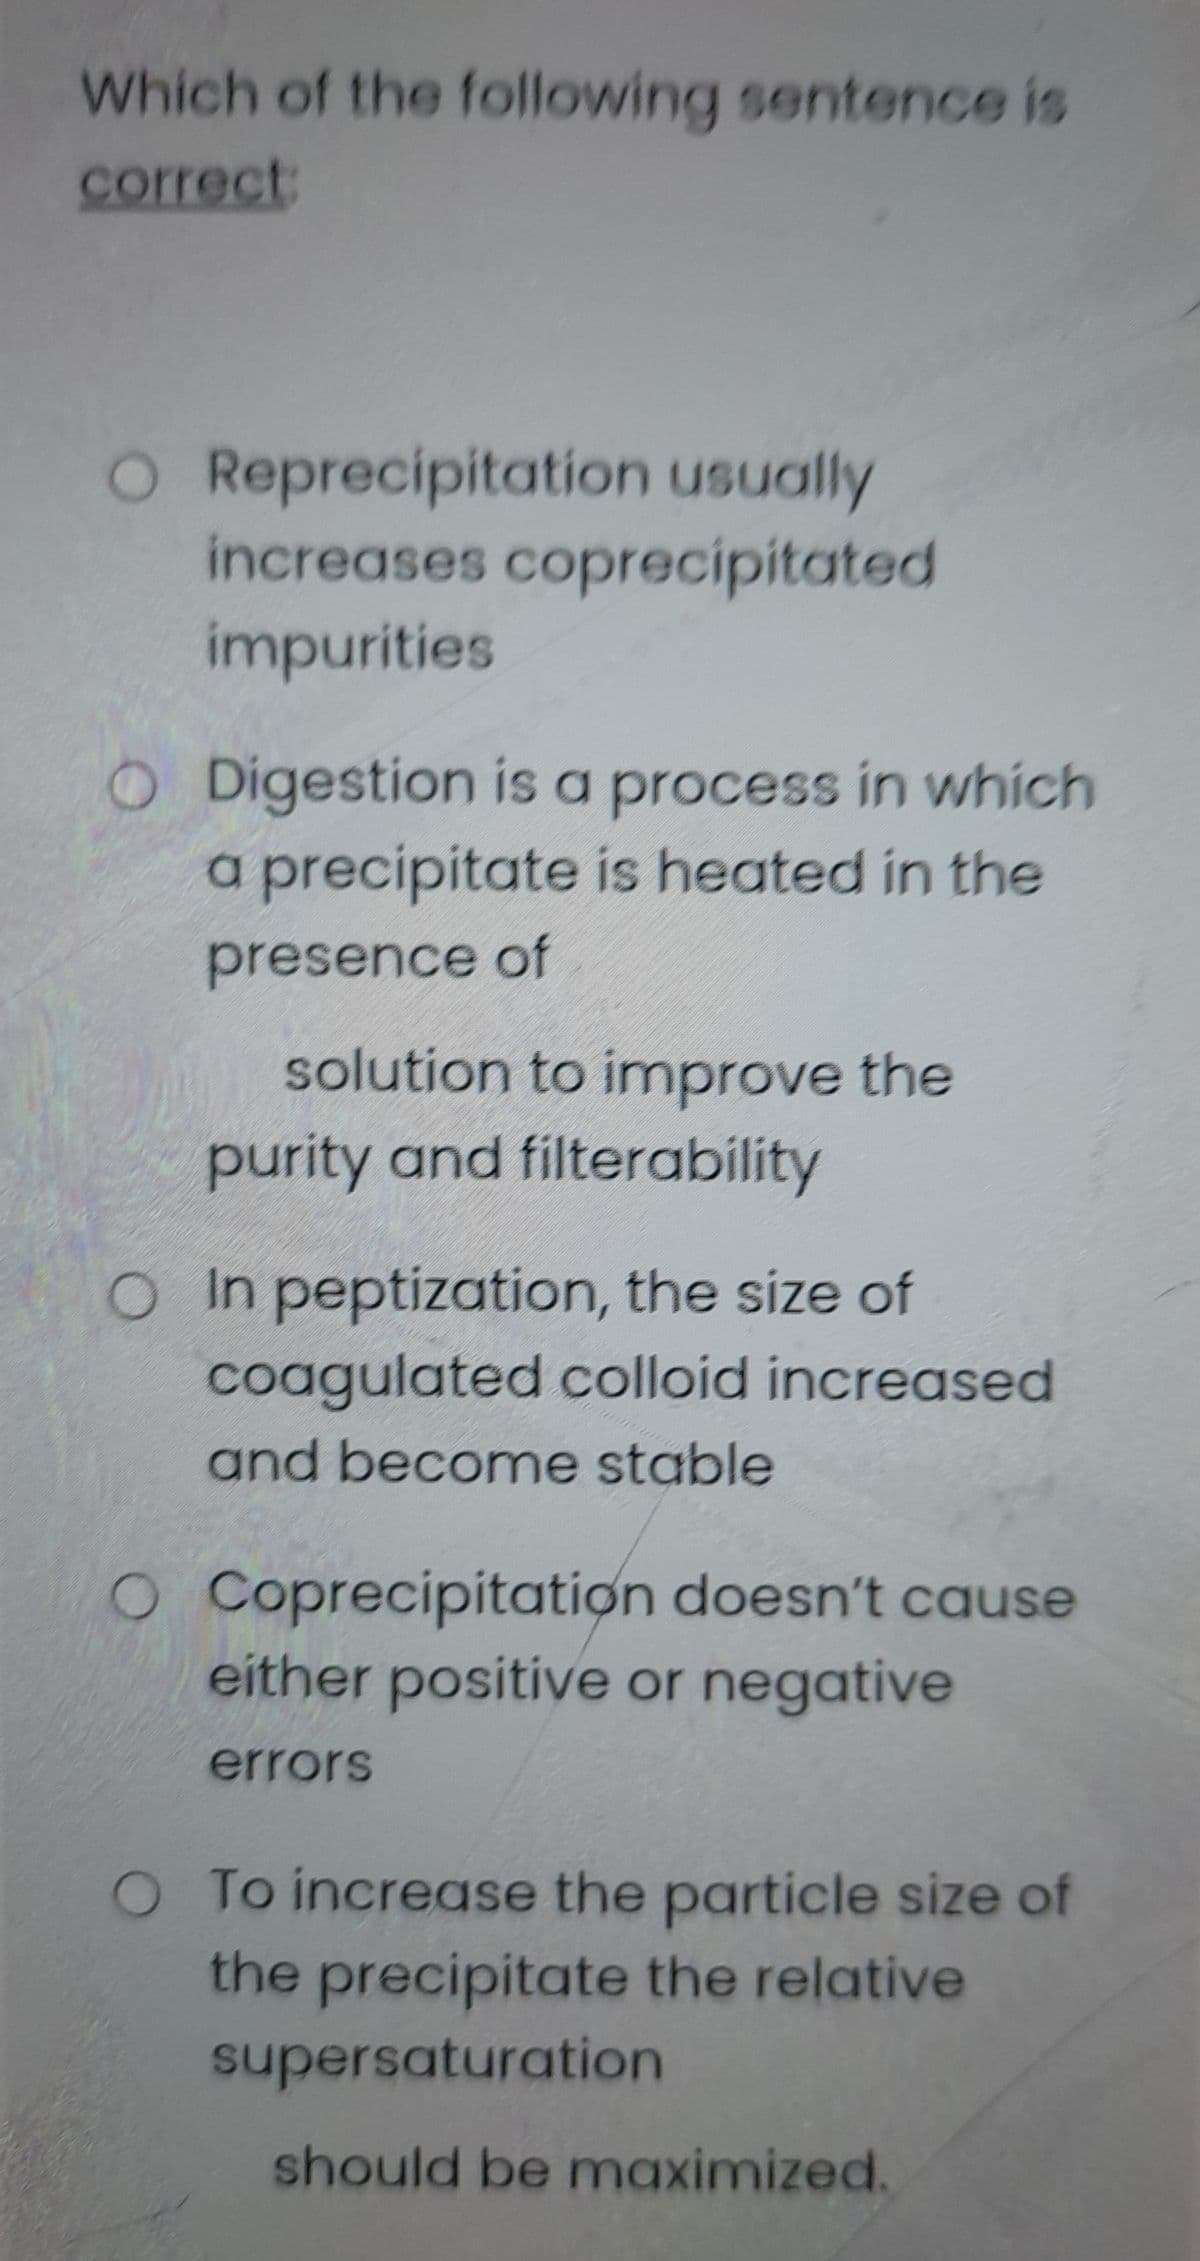 Which of the following sentence is
correct:
O Reprecipitation usually
increases coprecipitated
impurities
O Digestion is a process in which
a precipitate is heated in the
presence of
solution to improve the
purity and filterability
OIn peptization, the size of
coagulated colloid increased
and become stable
O Coprecipitation doesn't cause
either positive or negative
errors
O To increase the particle size of
the precipitate the relative
supersaturation
should be maximized.
